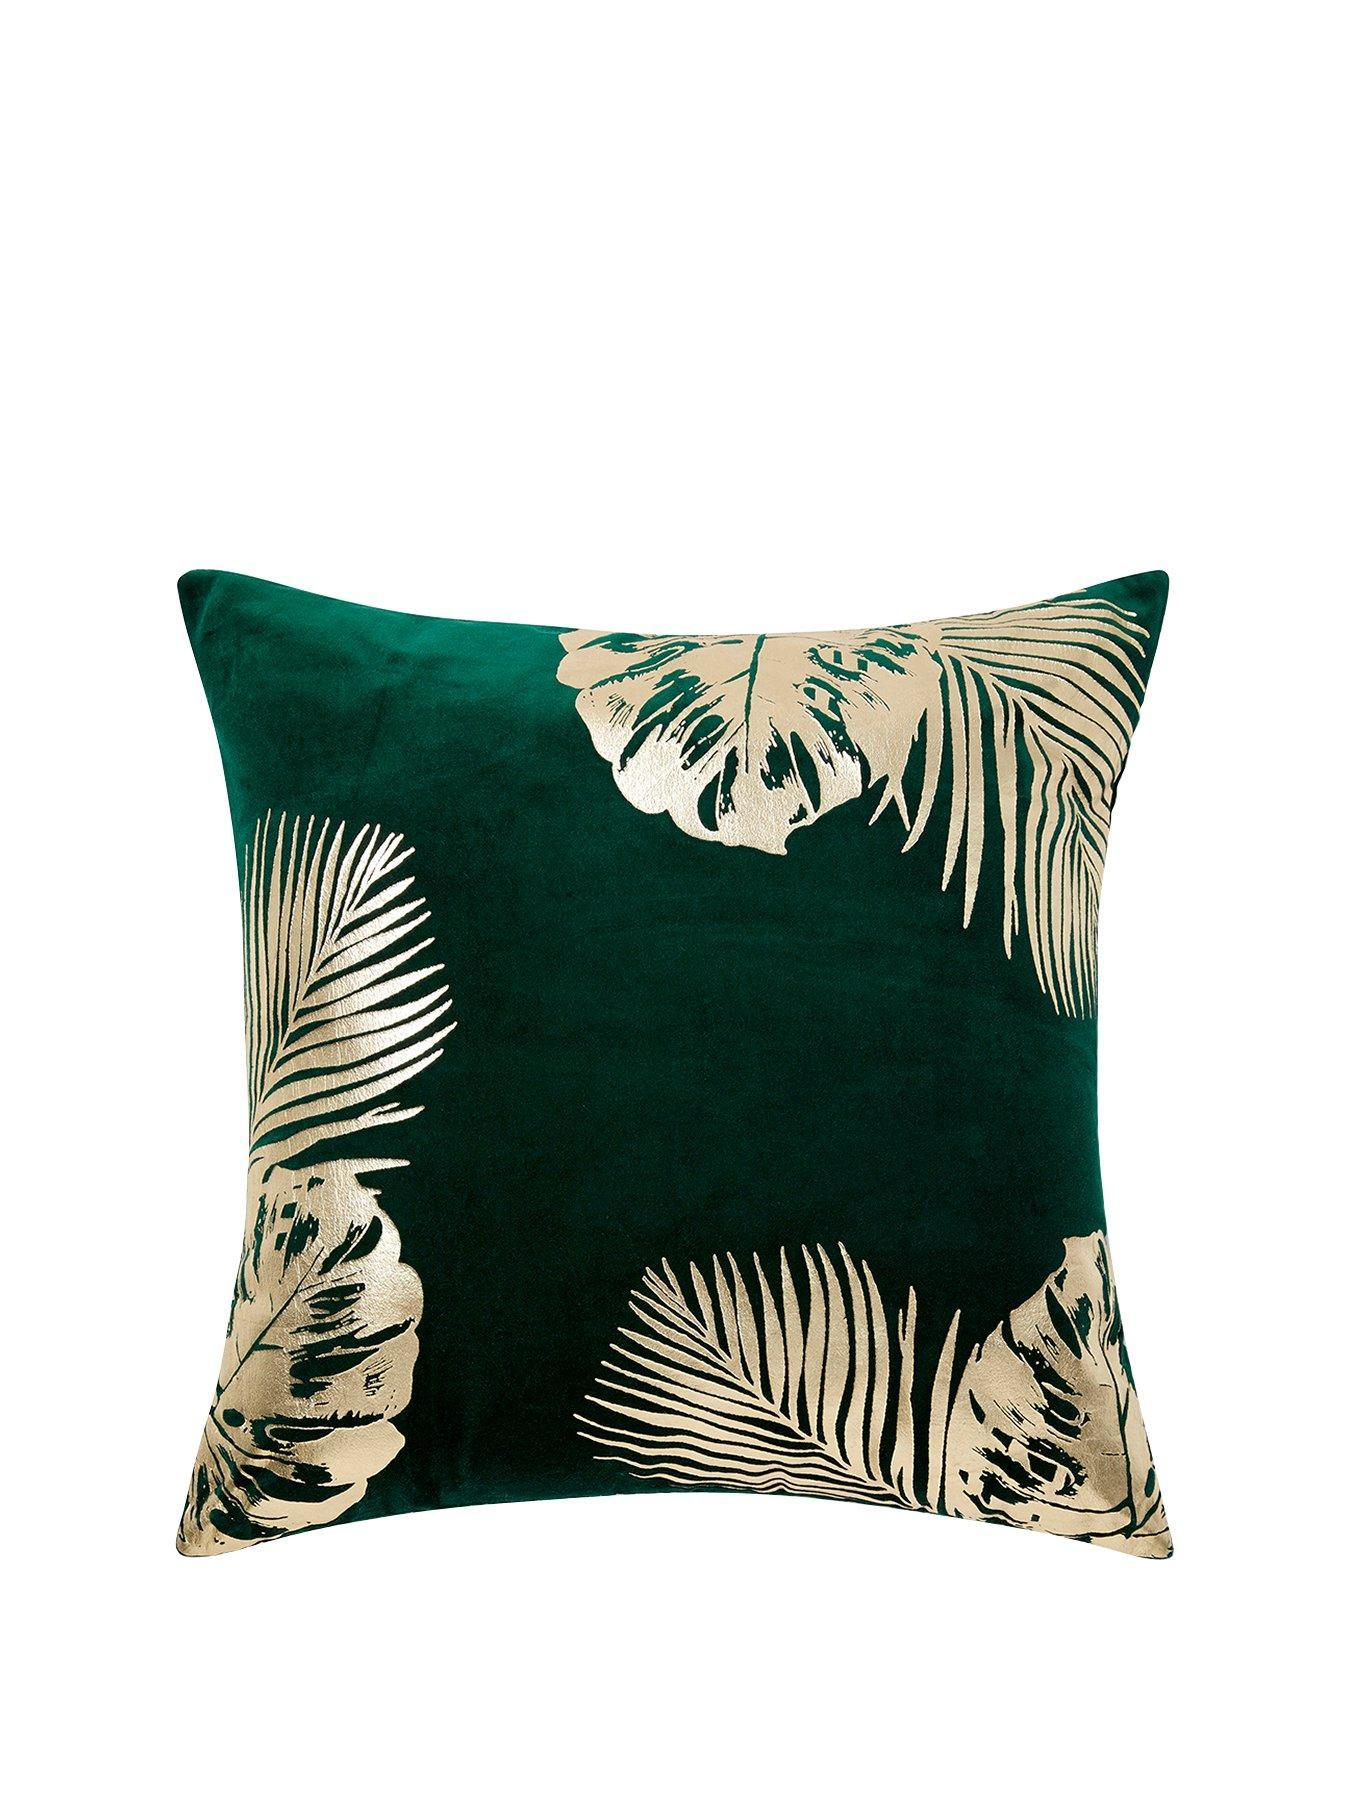 Green and gold leaf print cushion home accessories inspiration| Today we're talking inspiration for adding green to your living room. Green is a really versatile colour to decorate your home with. But, which colours and tones work well? What kind of accessories work with green? This post gives you ideas for pulling together an elegant green colour palette and pieces for your home. Read more: kittyandb.com #greenlivingroom #greenaccessories #greencolorpalette #interiordecoratinginspiration #greenaesthetic #greensofa #cushion #greenandgold